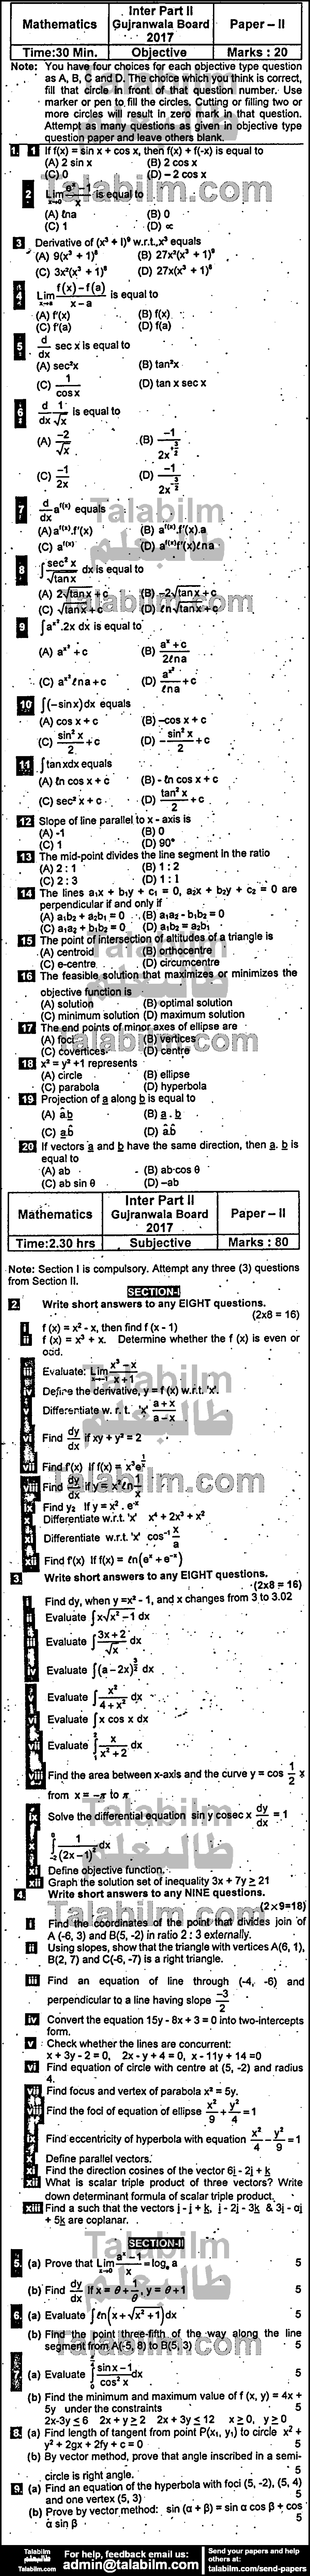 Math 0 past paper for Group-II 2017